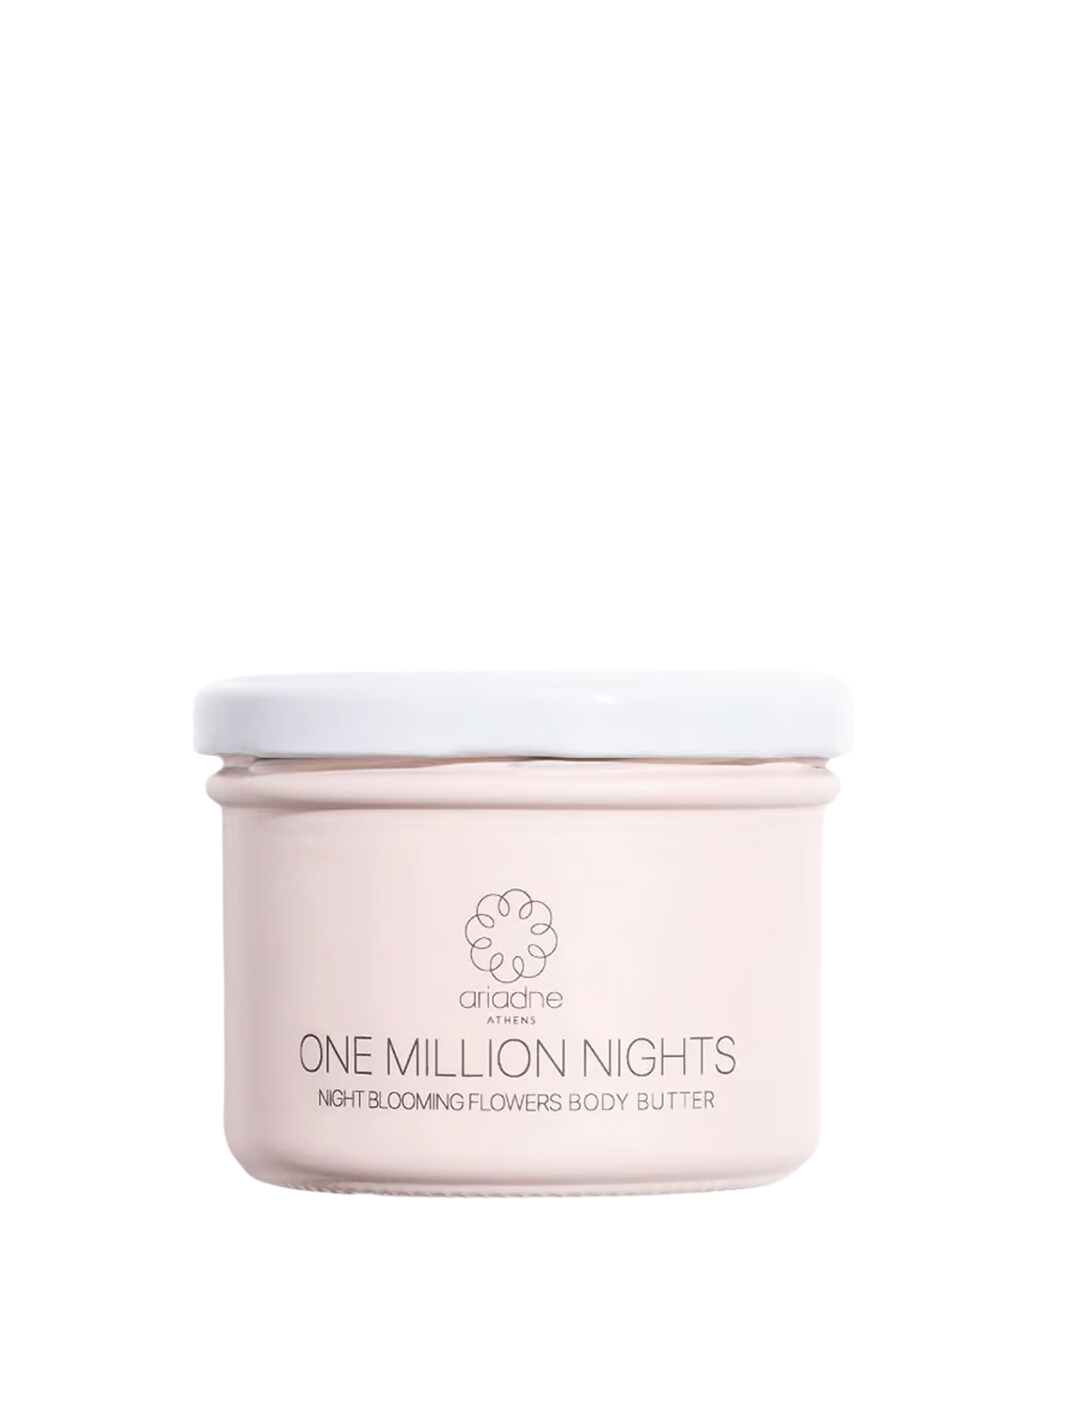 One Million Nights Floral Musk Body Butter